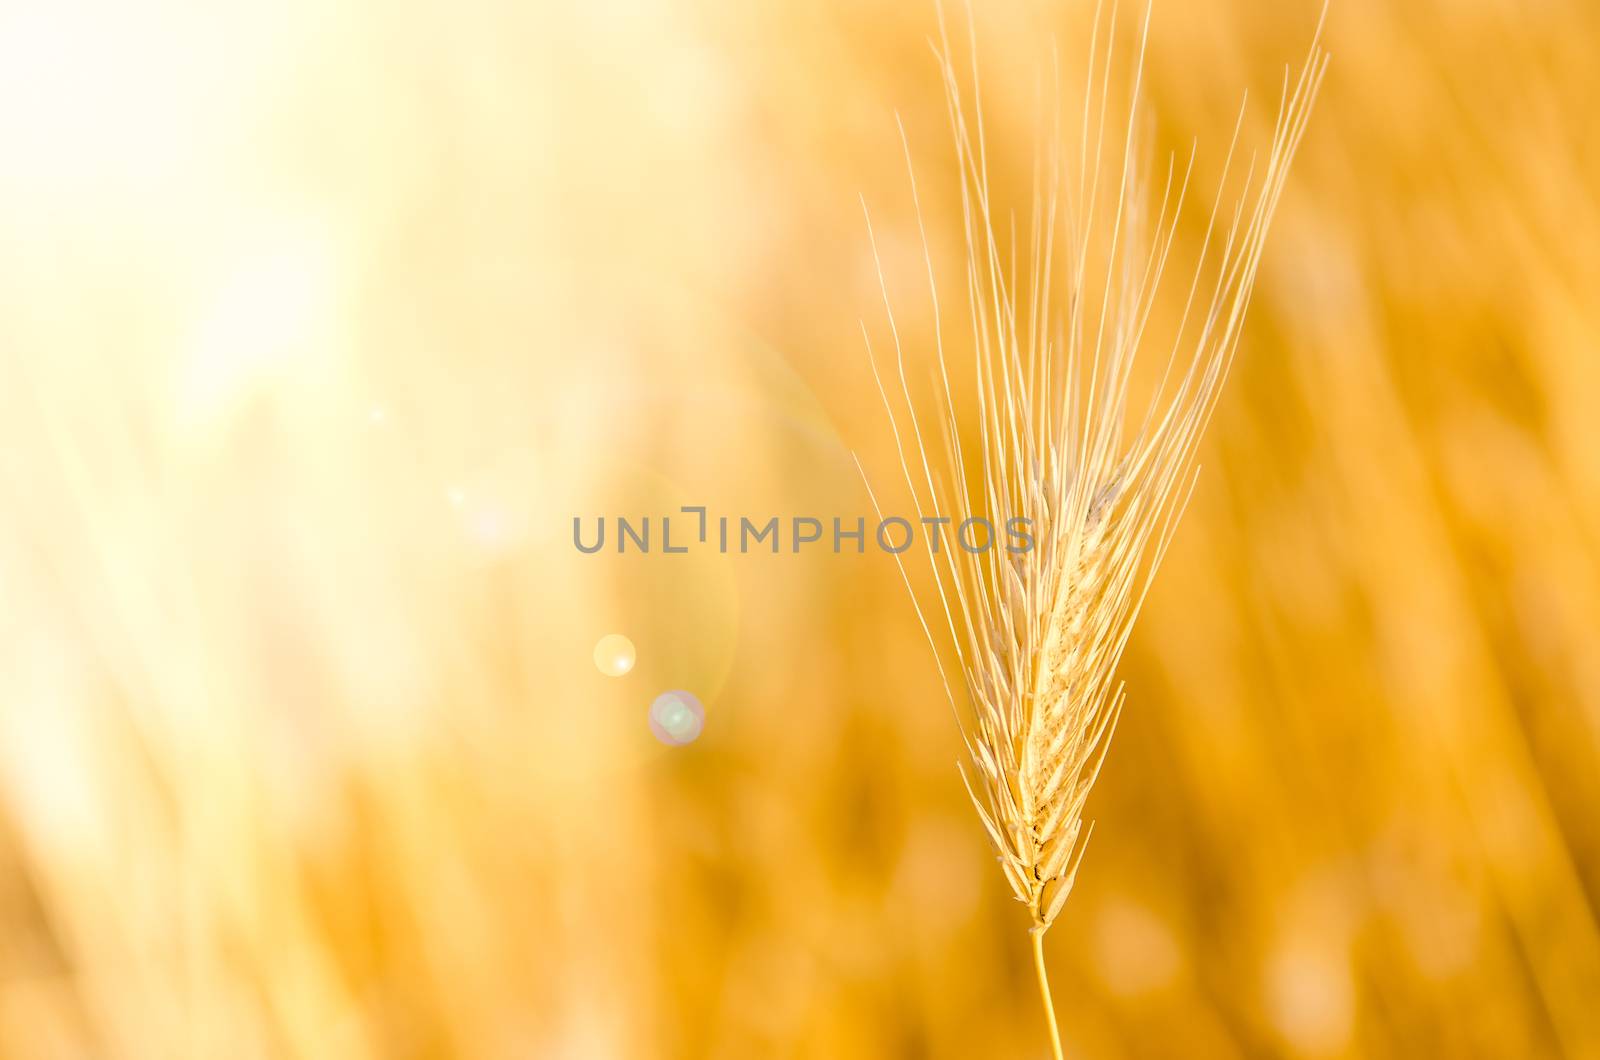 Detail of barley with nice bokeh background by martinm303